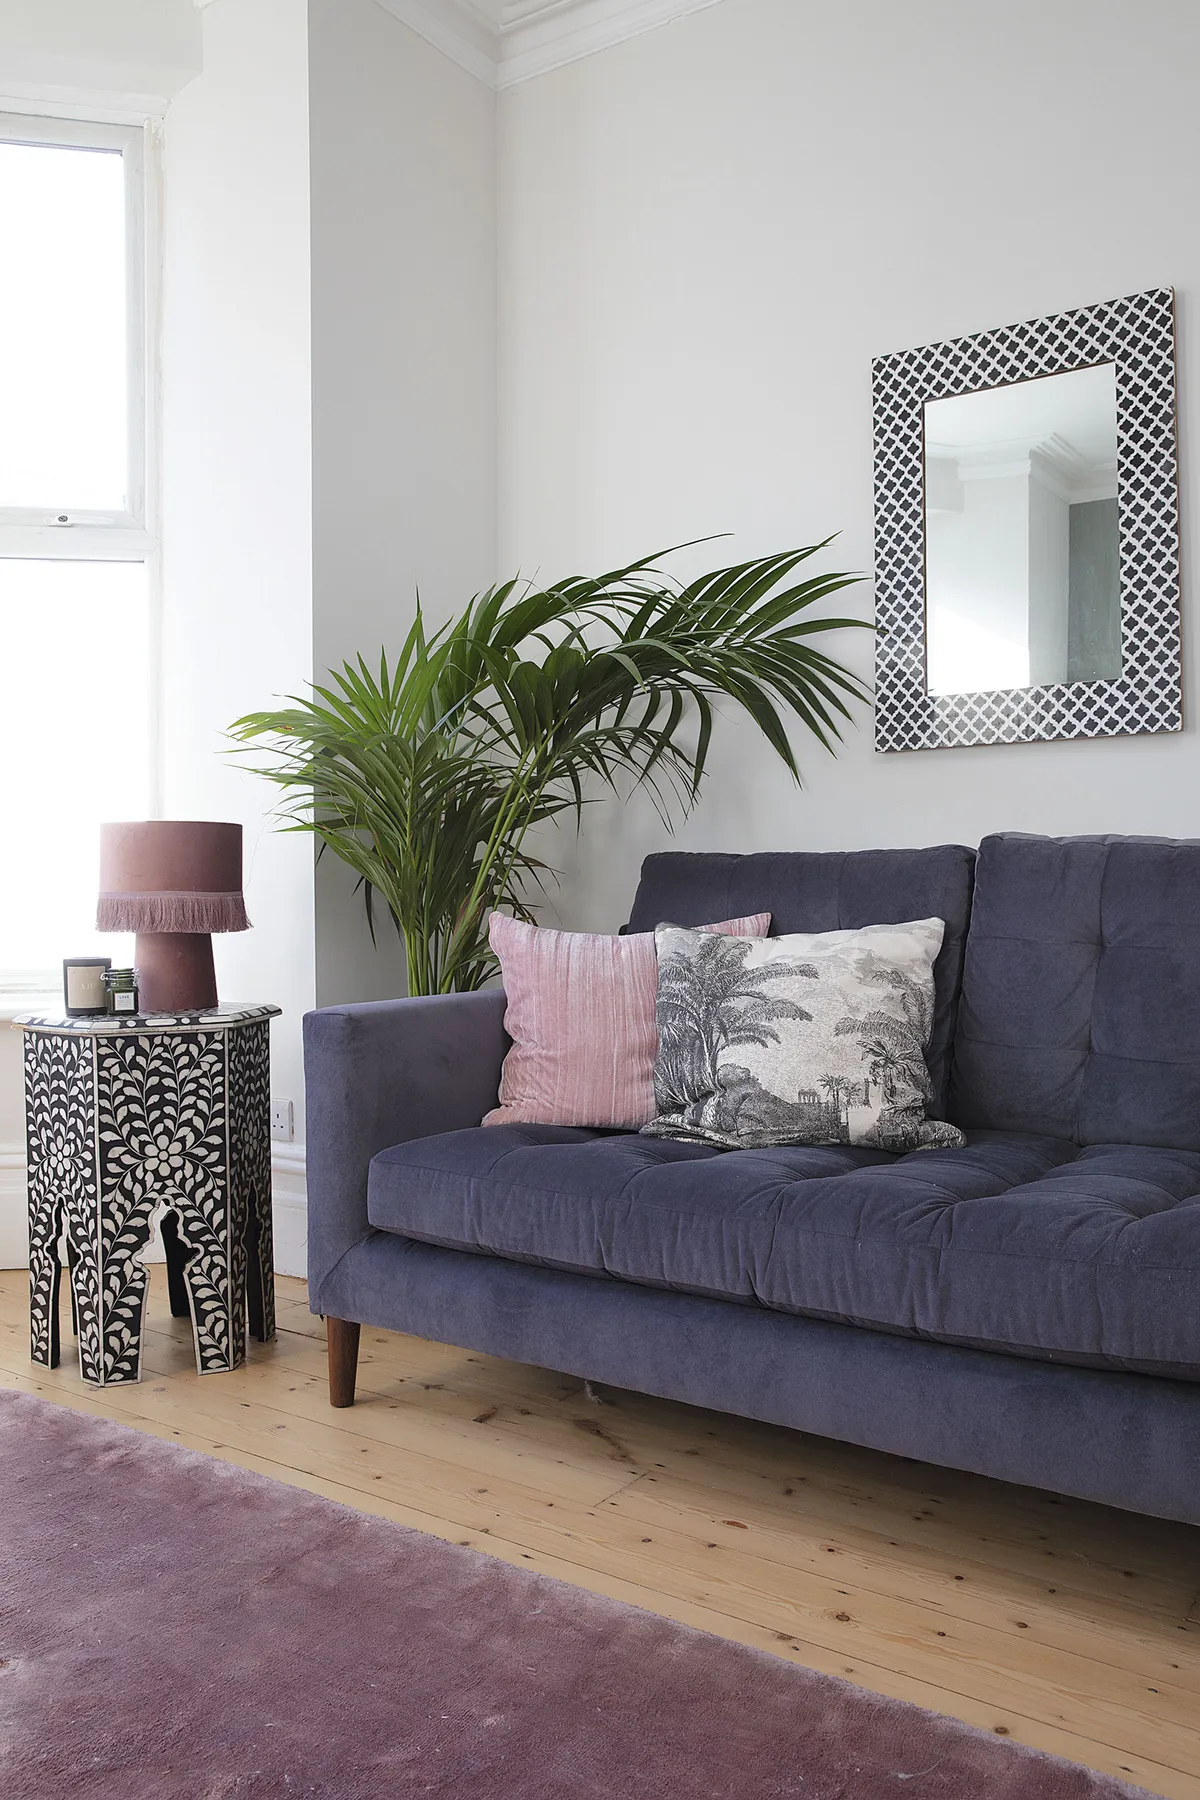 ‘I’ve added monochrome elements to ground the scheme, such as the Swoon side table, HomeSense mirror and cushion from H&M Home. Pink accents, like this HomeSense tassel lamp, are dotted throughout the house’